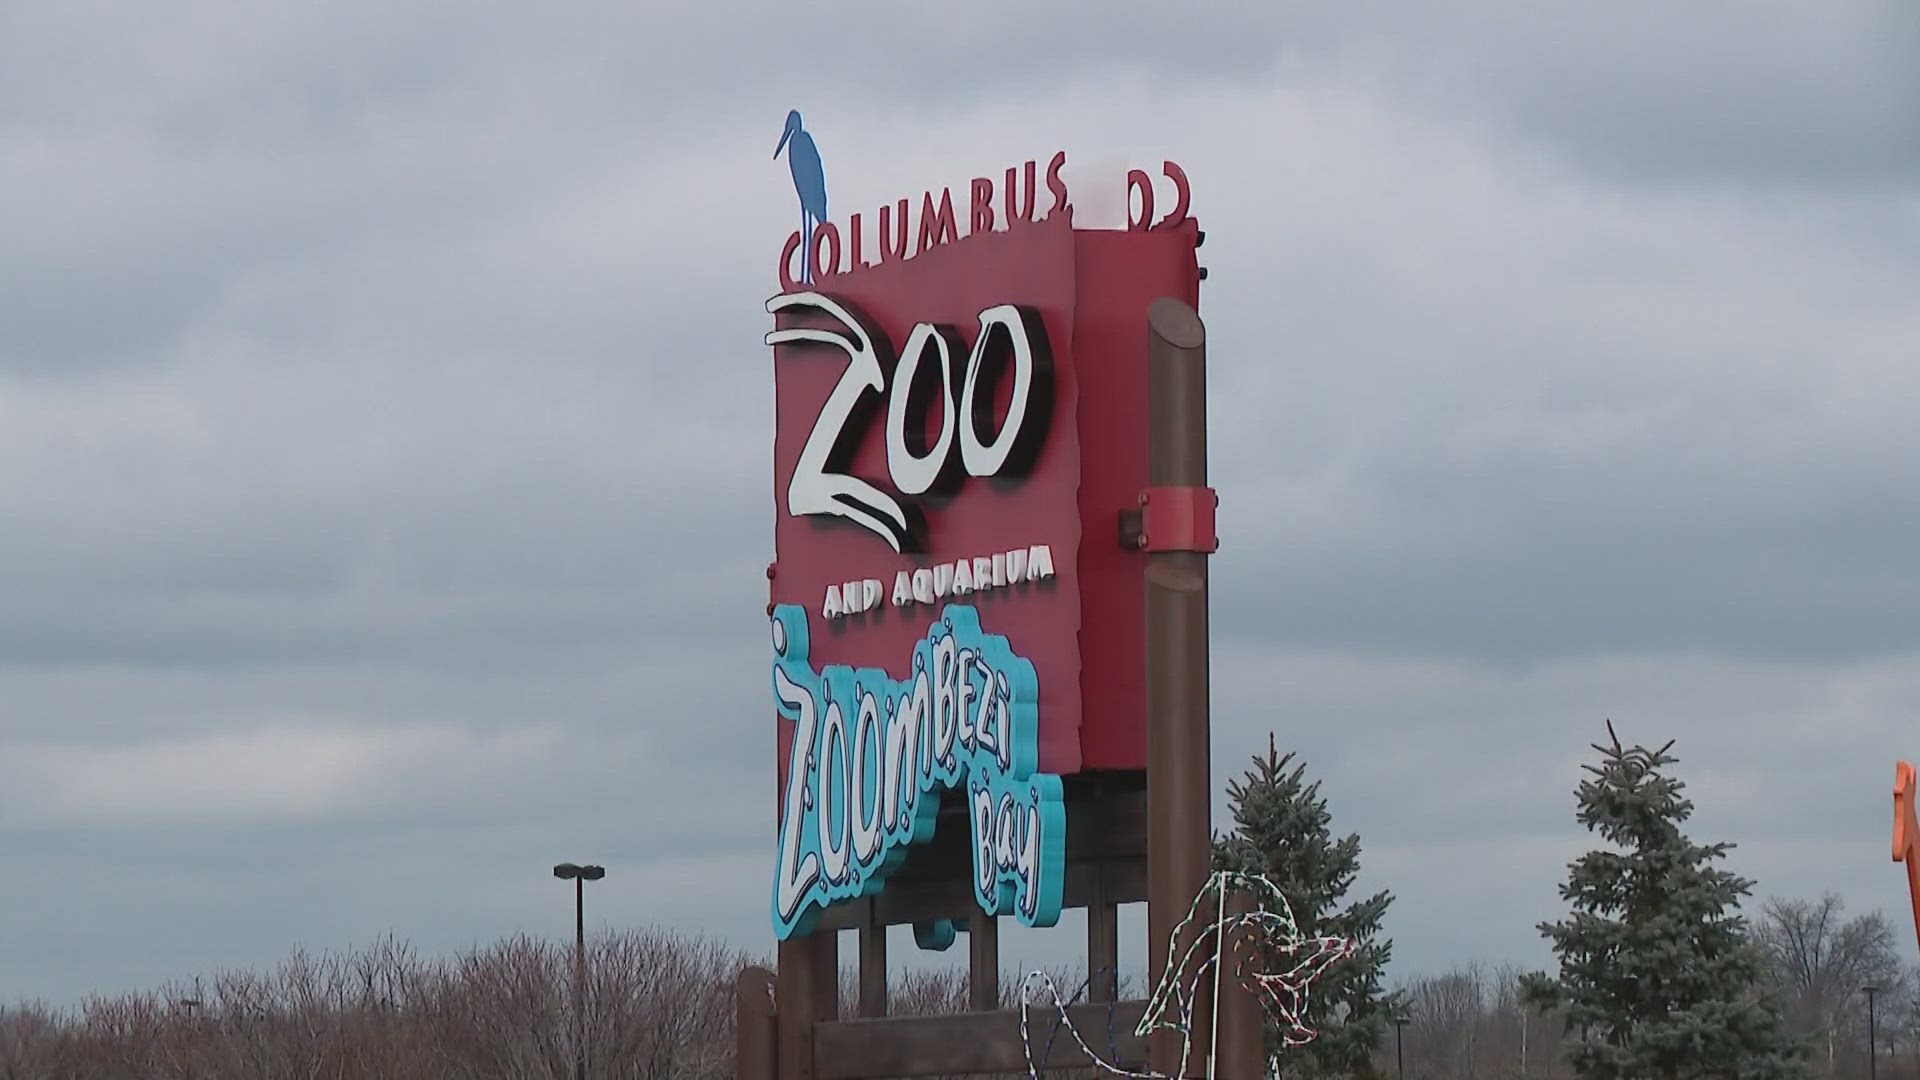 The Delaware County Sheriff's Office is investigating after a Hyundai was stolen from the Columbus Zoo and Aquarium's parking lot Monday afternoon.